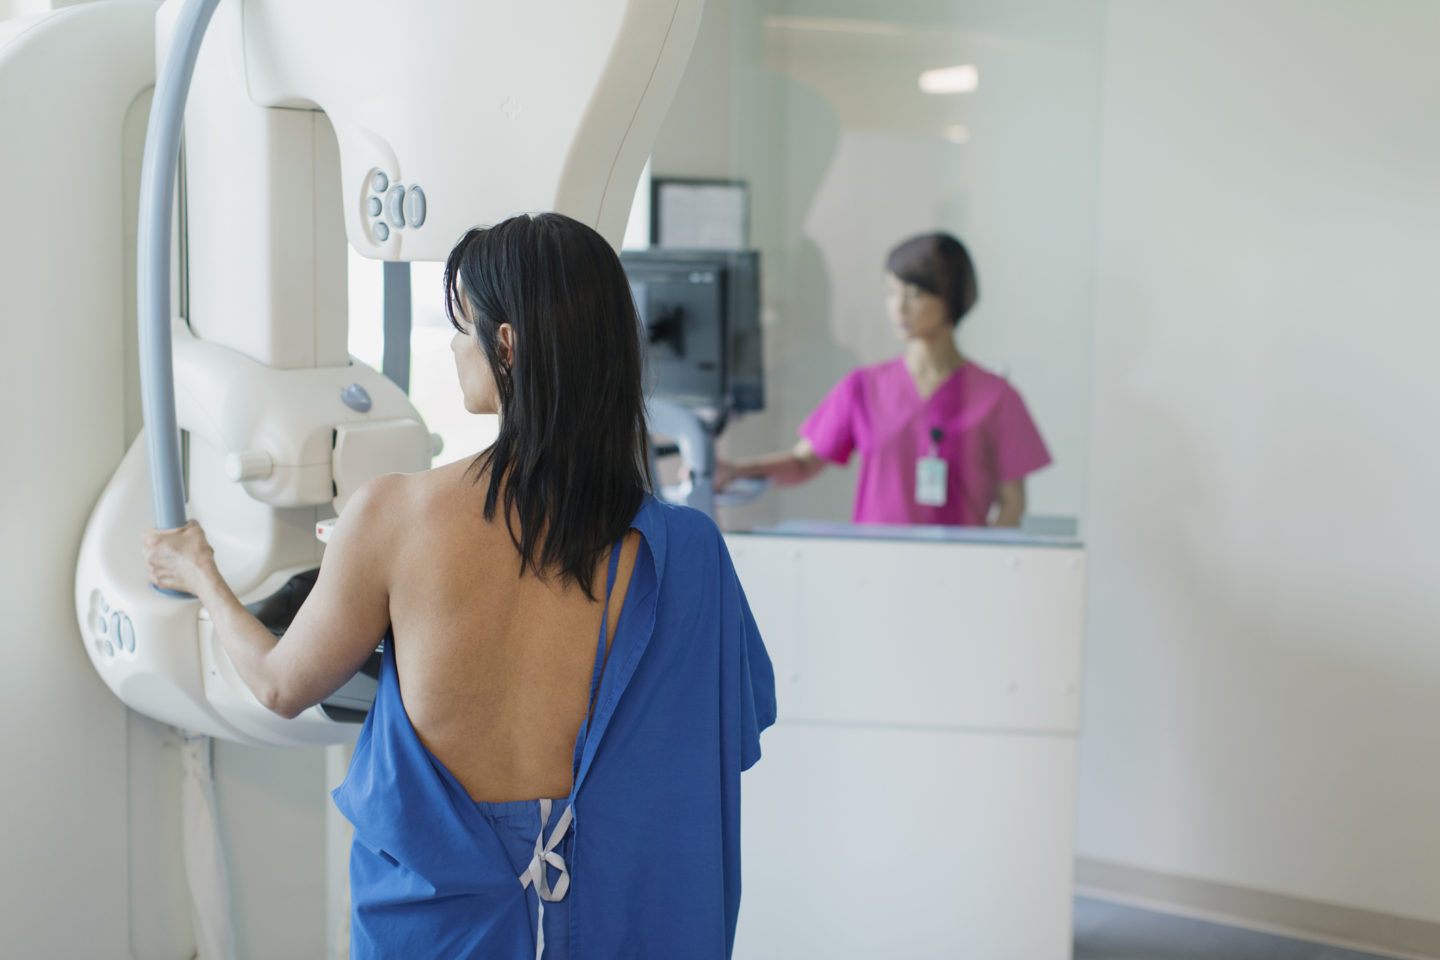 As A Gynecologist and Breast Cancer Survivor, This is What I Want You to Know About Mammograms